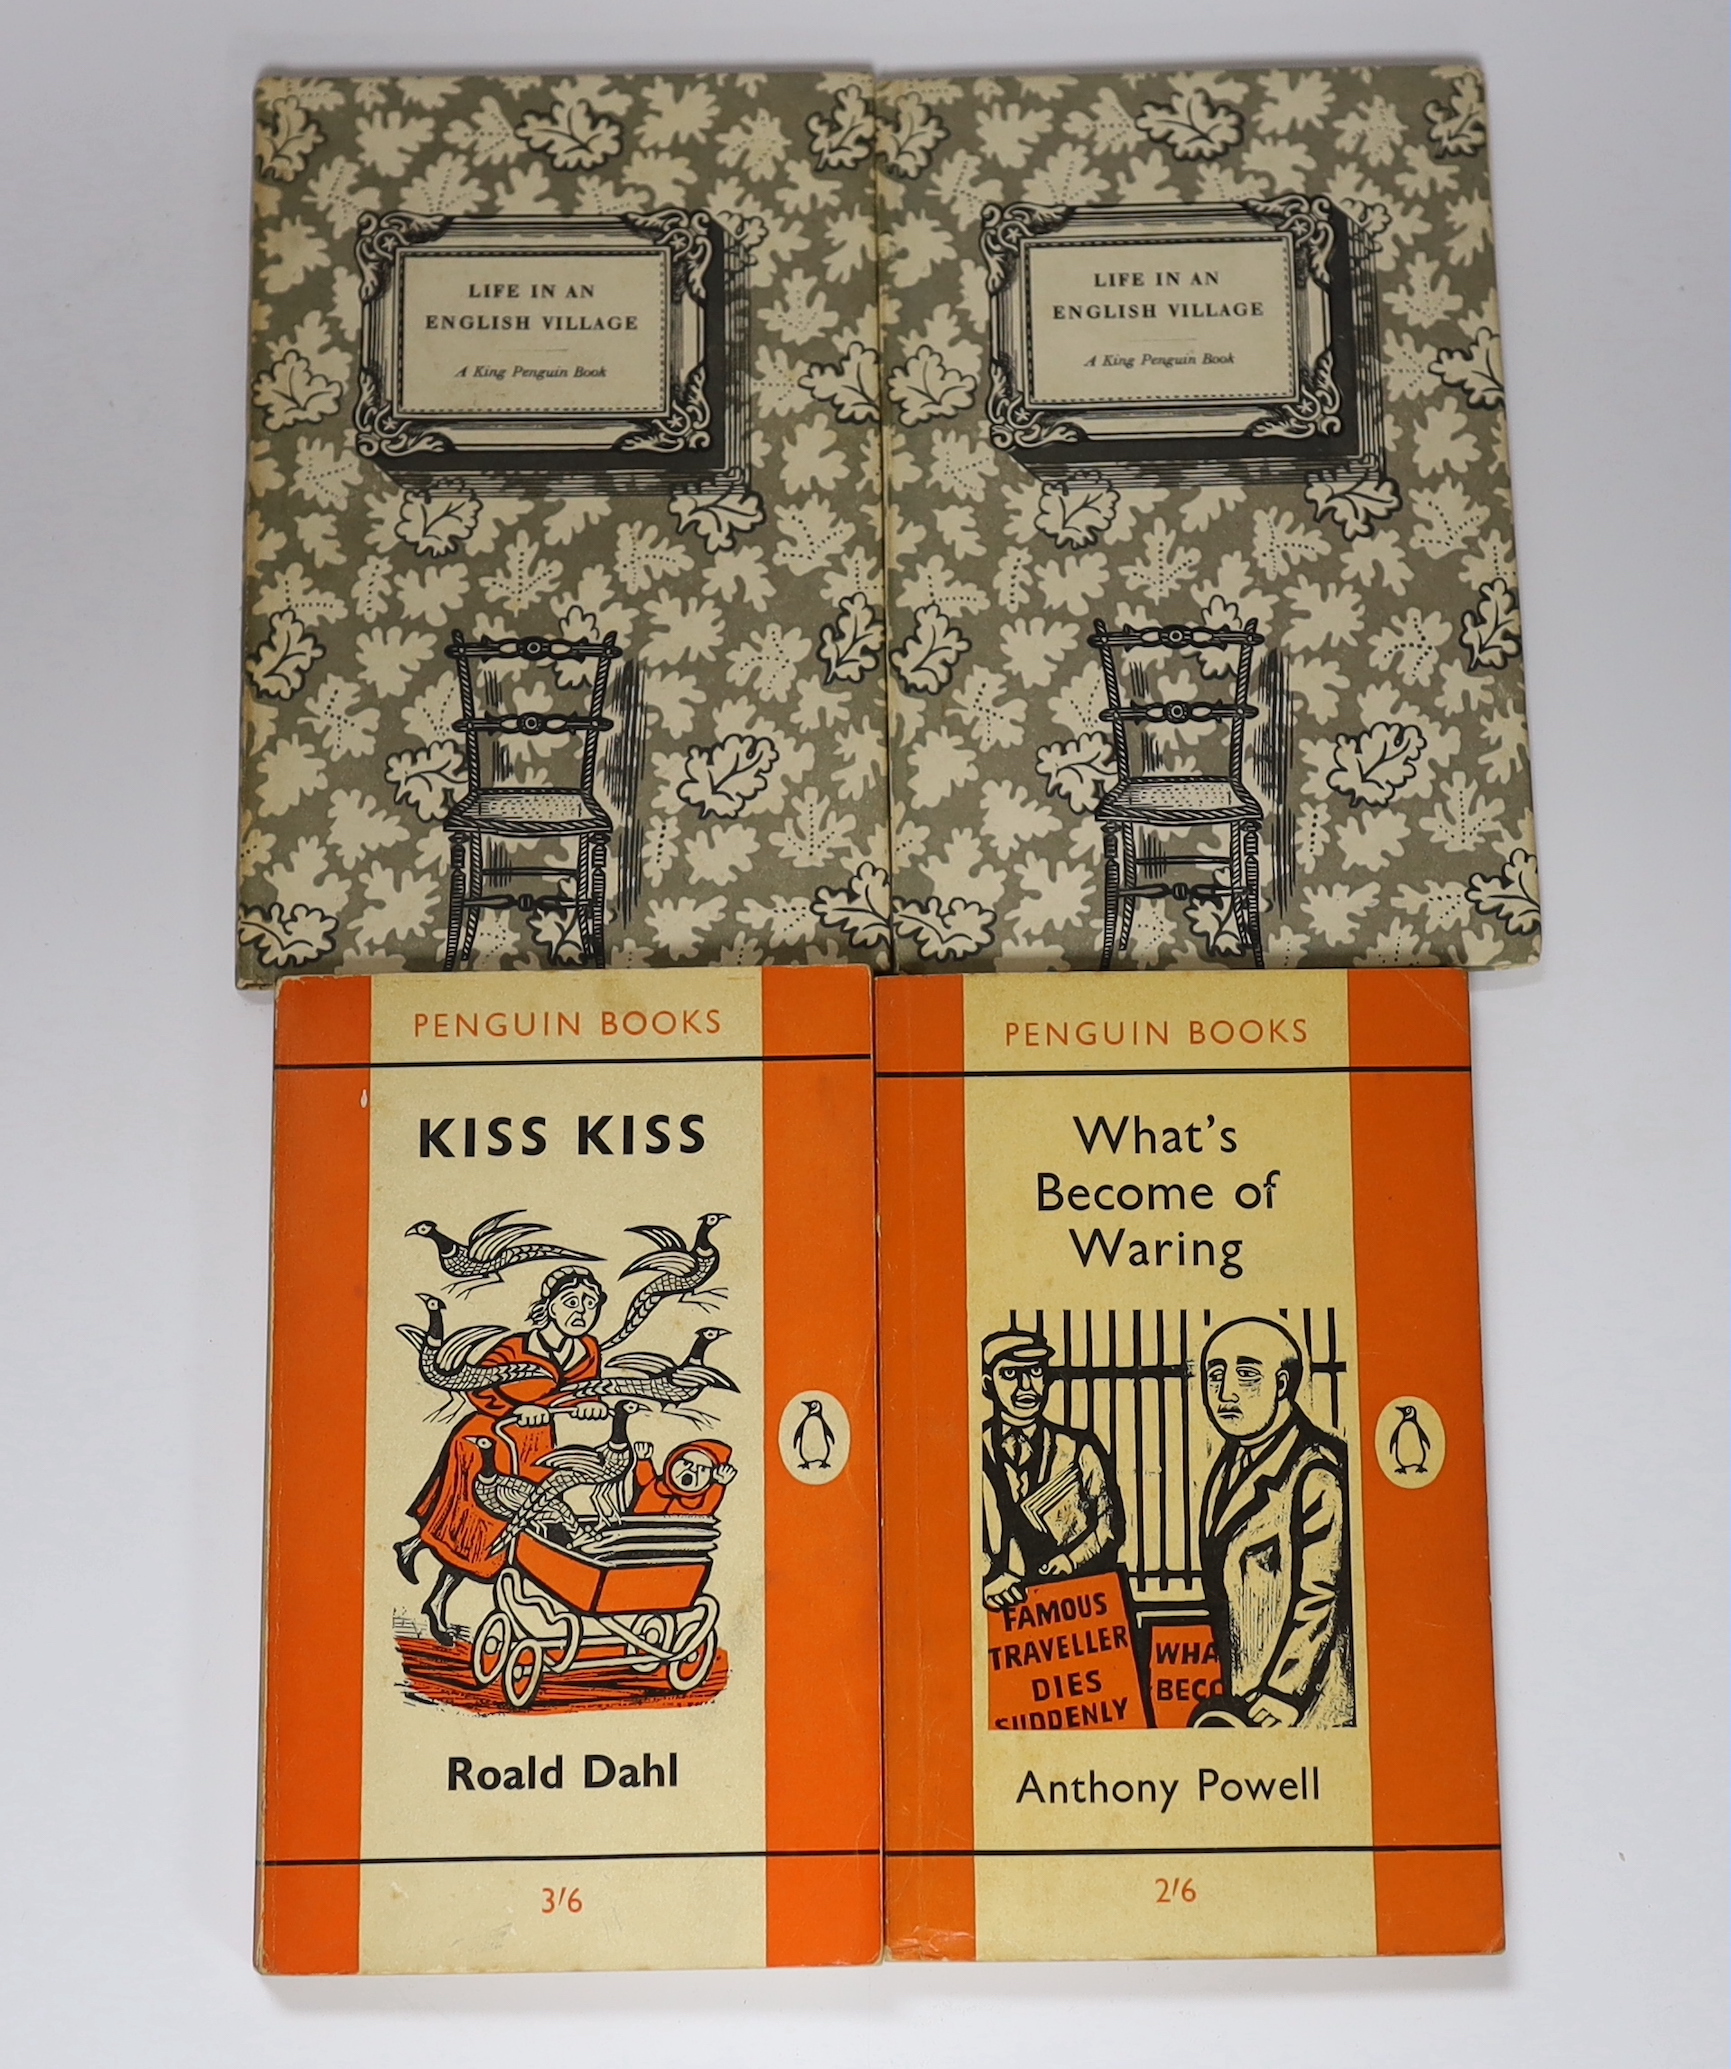 Bawden, Edward (illustrator), Carrington, Noel - Life in an English Village, with 16 lithographs, Penguin Books, 1949, (2 copies); Dahl, Roald- Kiss Kiss, 1962 and Powell, Anthony - What’s Become of Waring, both Penguin